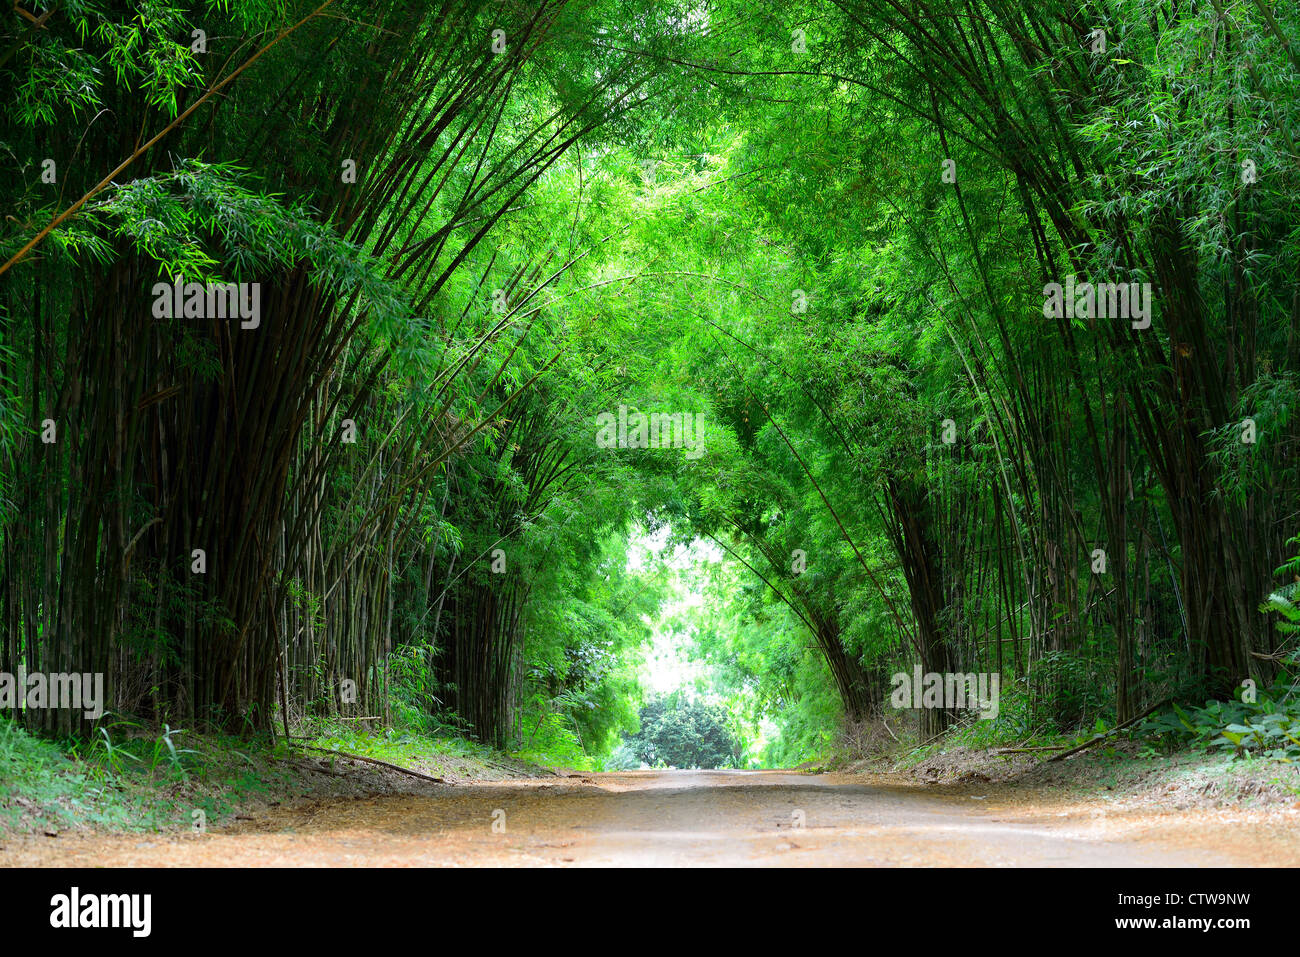 The high bamboo both side of the road bend to cover the clay road. Stock Photo